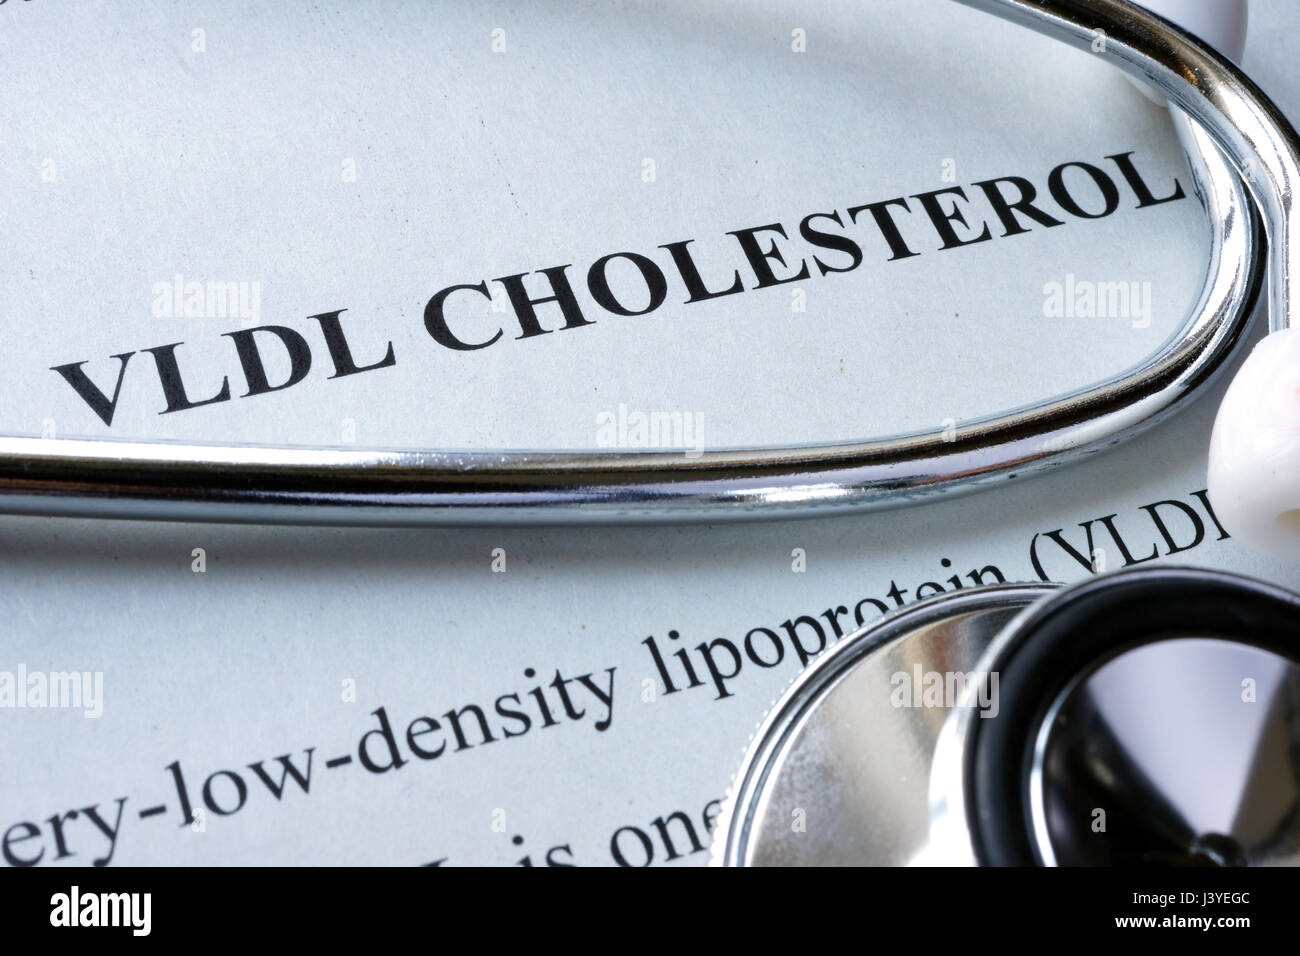 Page with title vldl cholesterol and stethoscope. Stock Photo